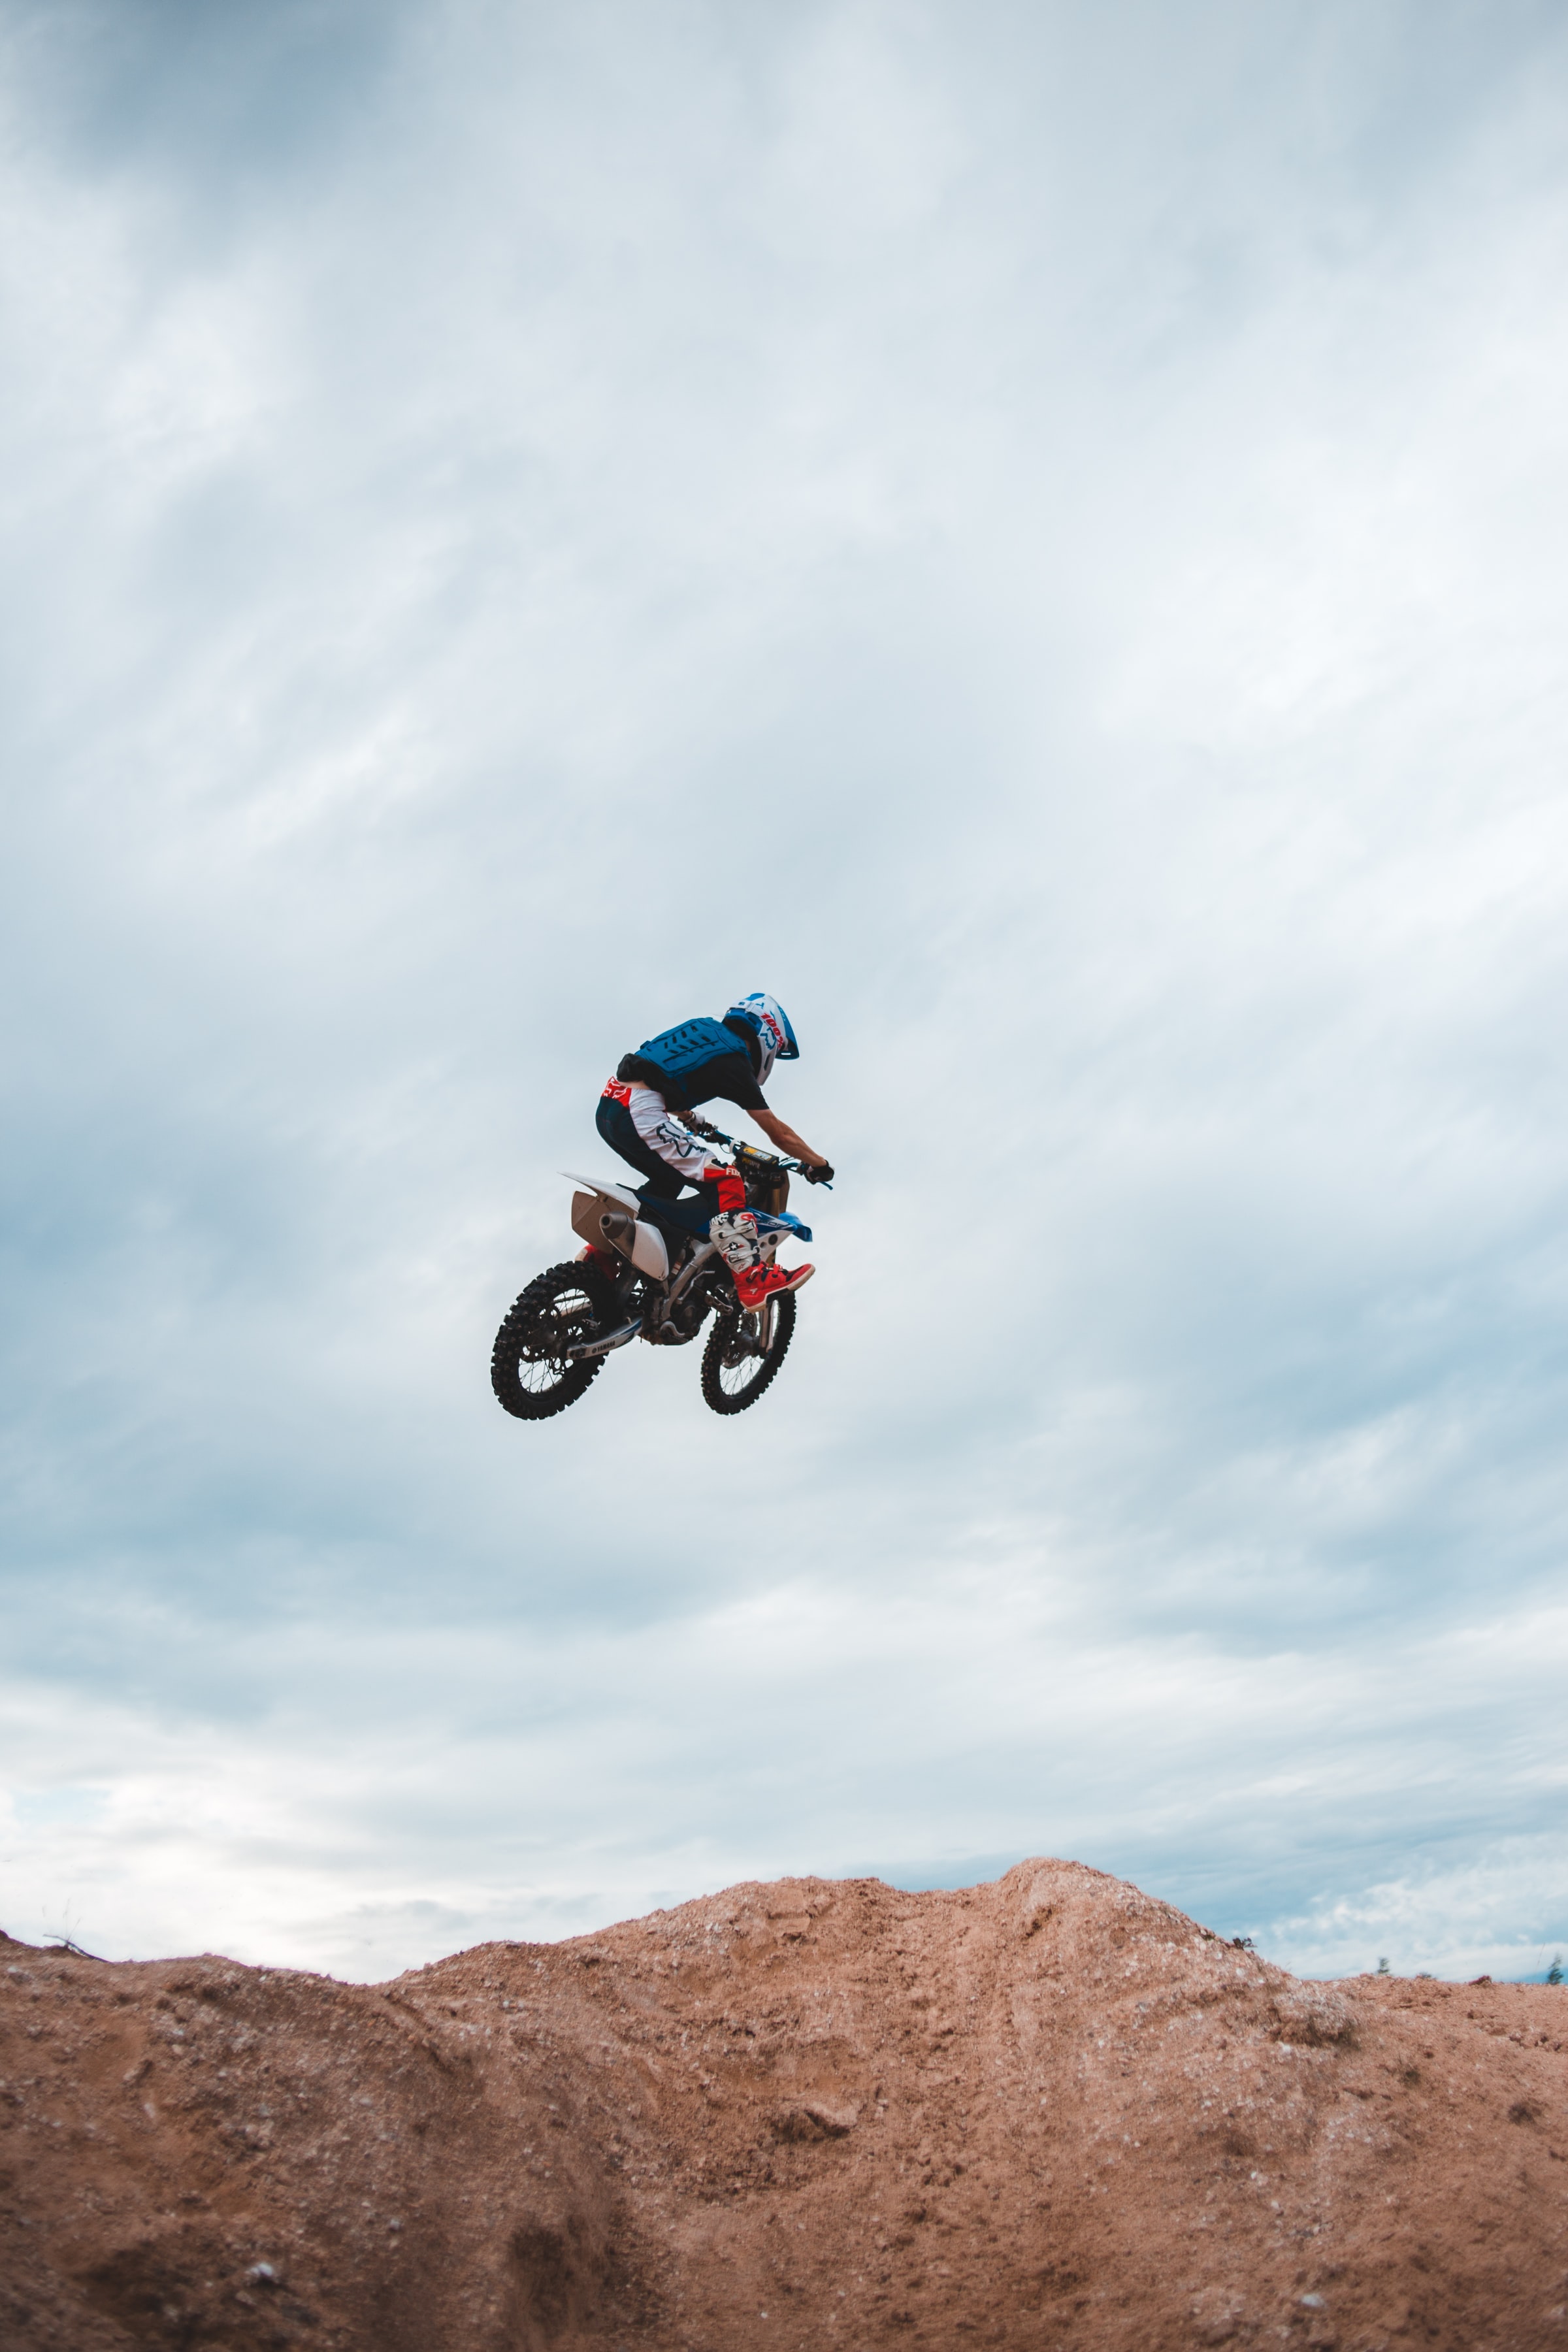 156172 Screensavers and Wallpapers Motorcyclist for phone. Download sand, motorcycles, motorcyclist, motorcycle, bike, bounce, jump, trick pictures for free